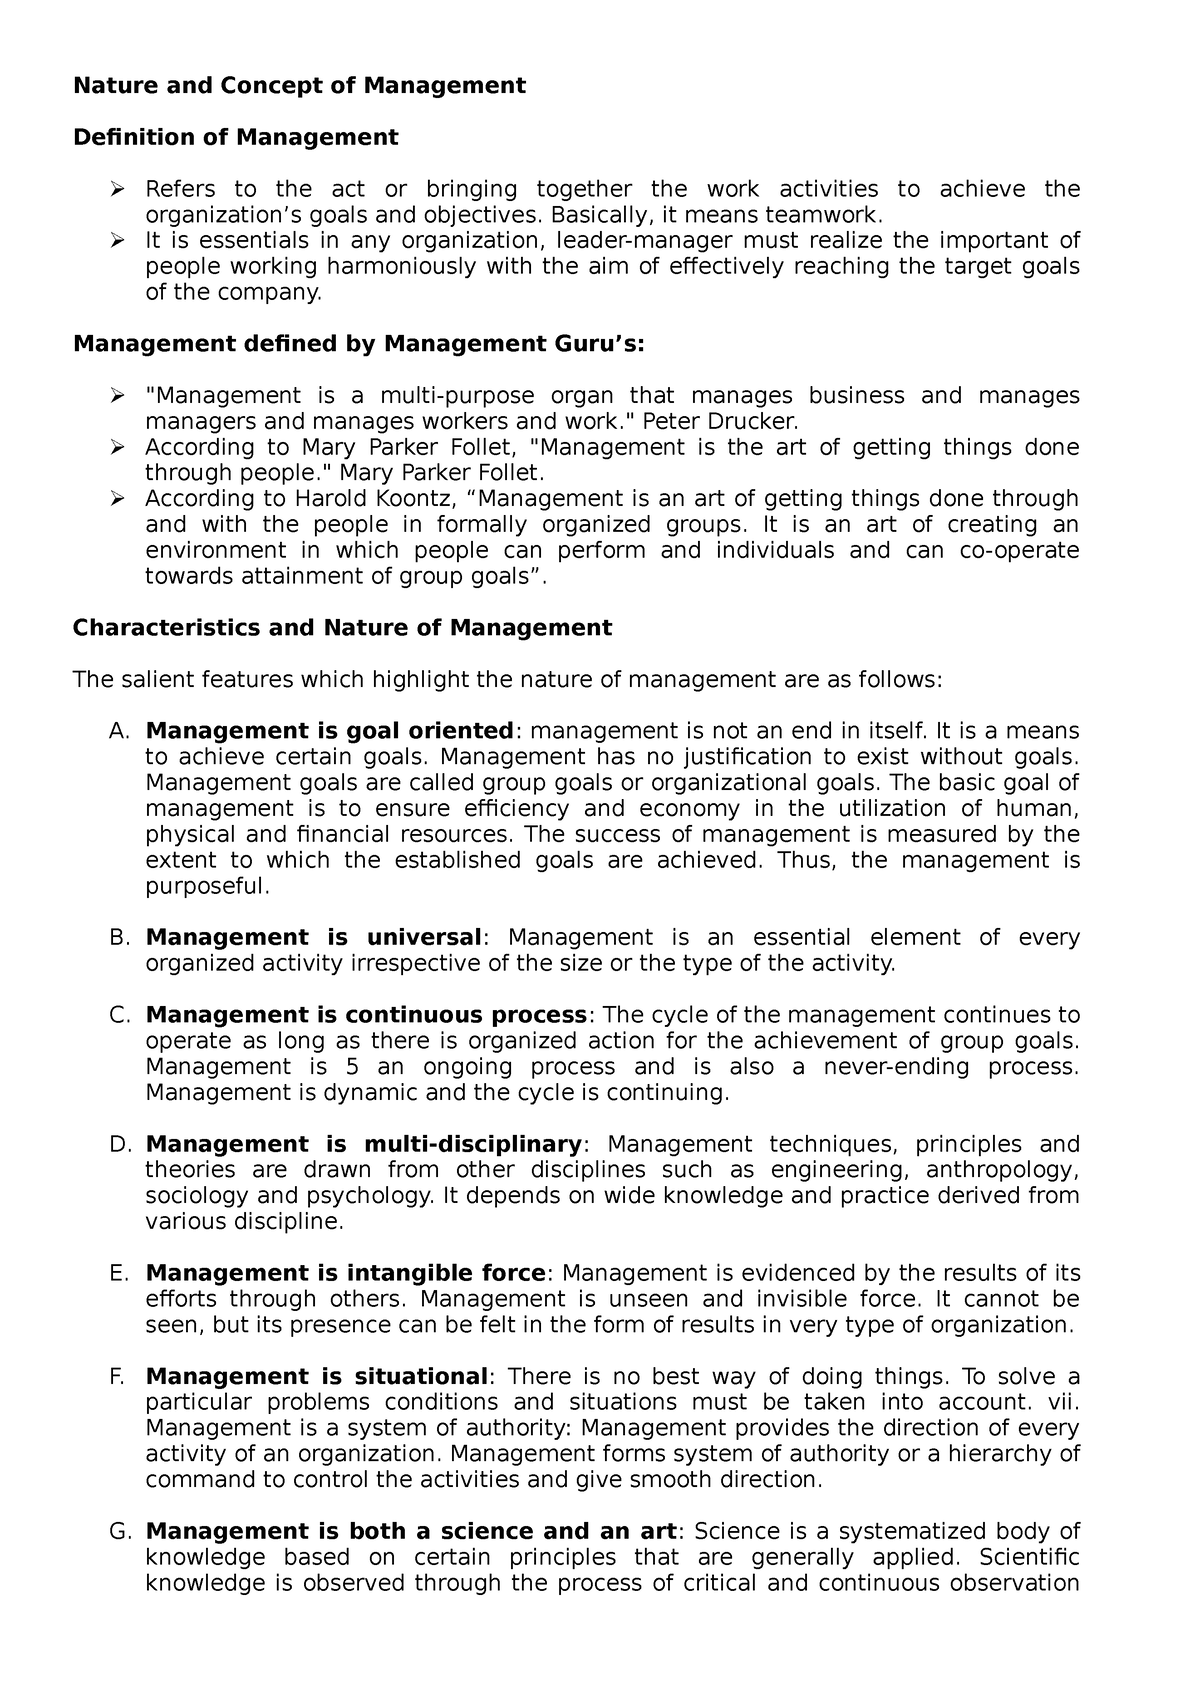 case study on nature of management